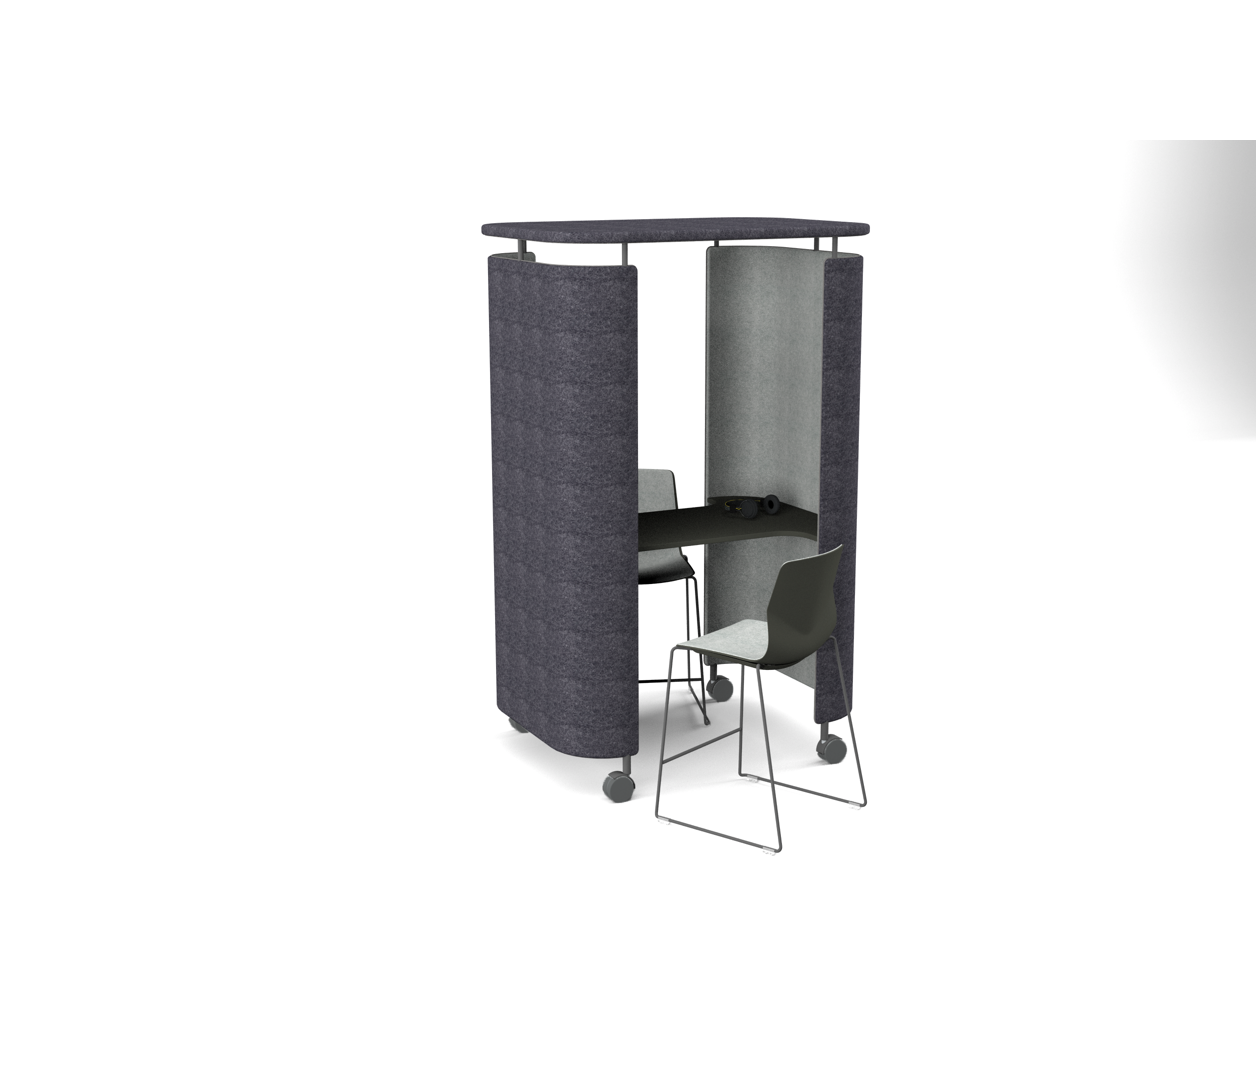 OCEE_FOUR – Work _ Study Booths – InnoPod – Packshot Image 2 Large